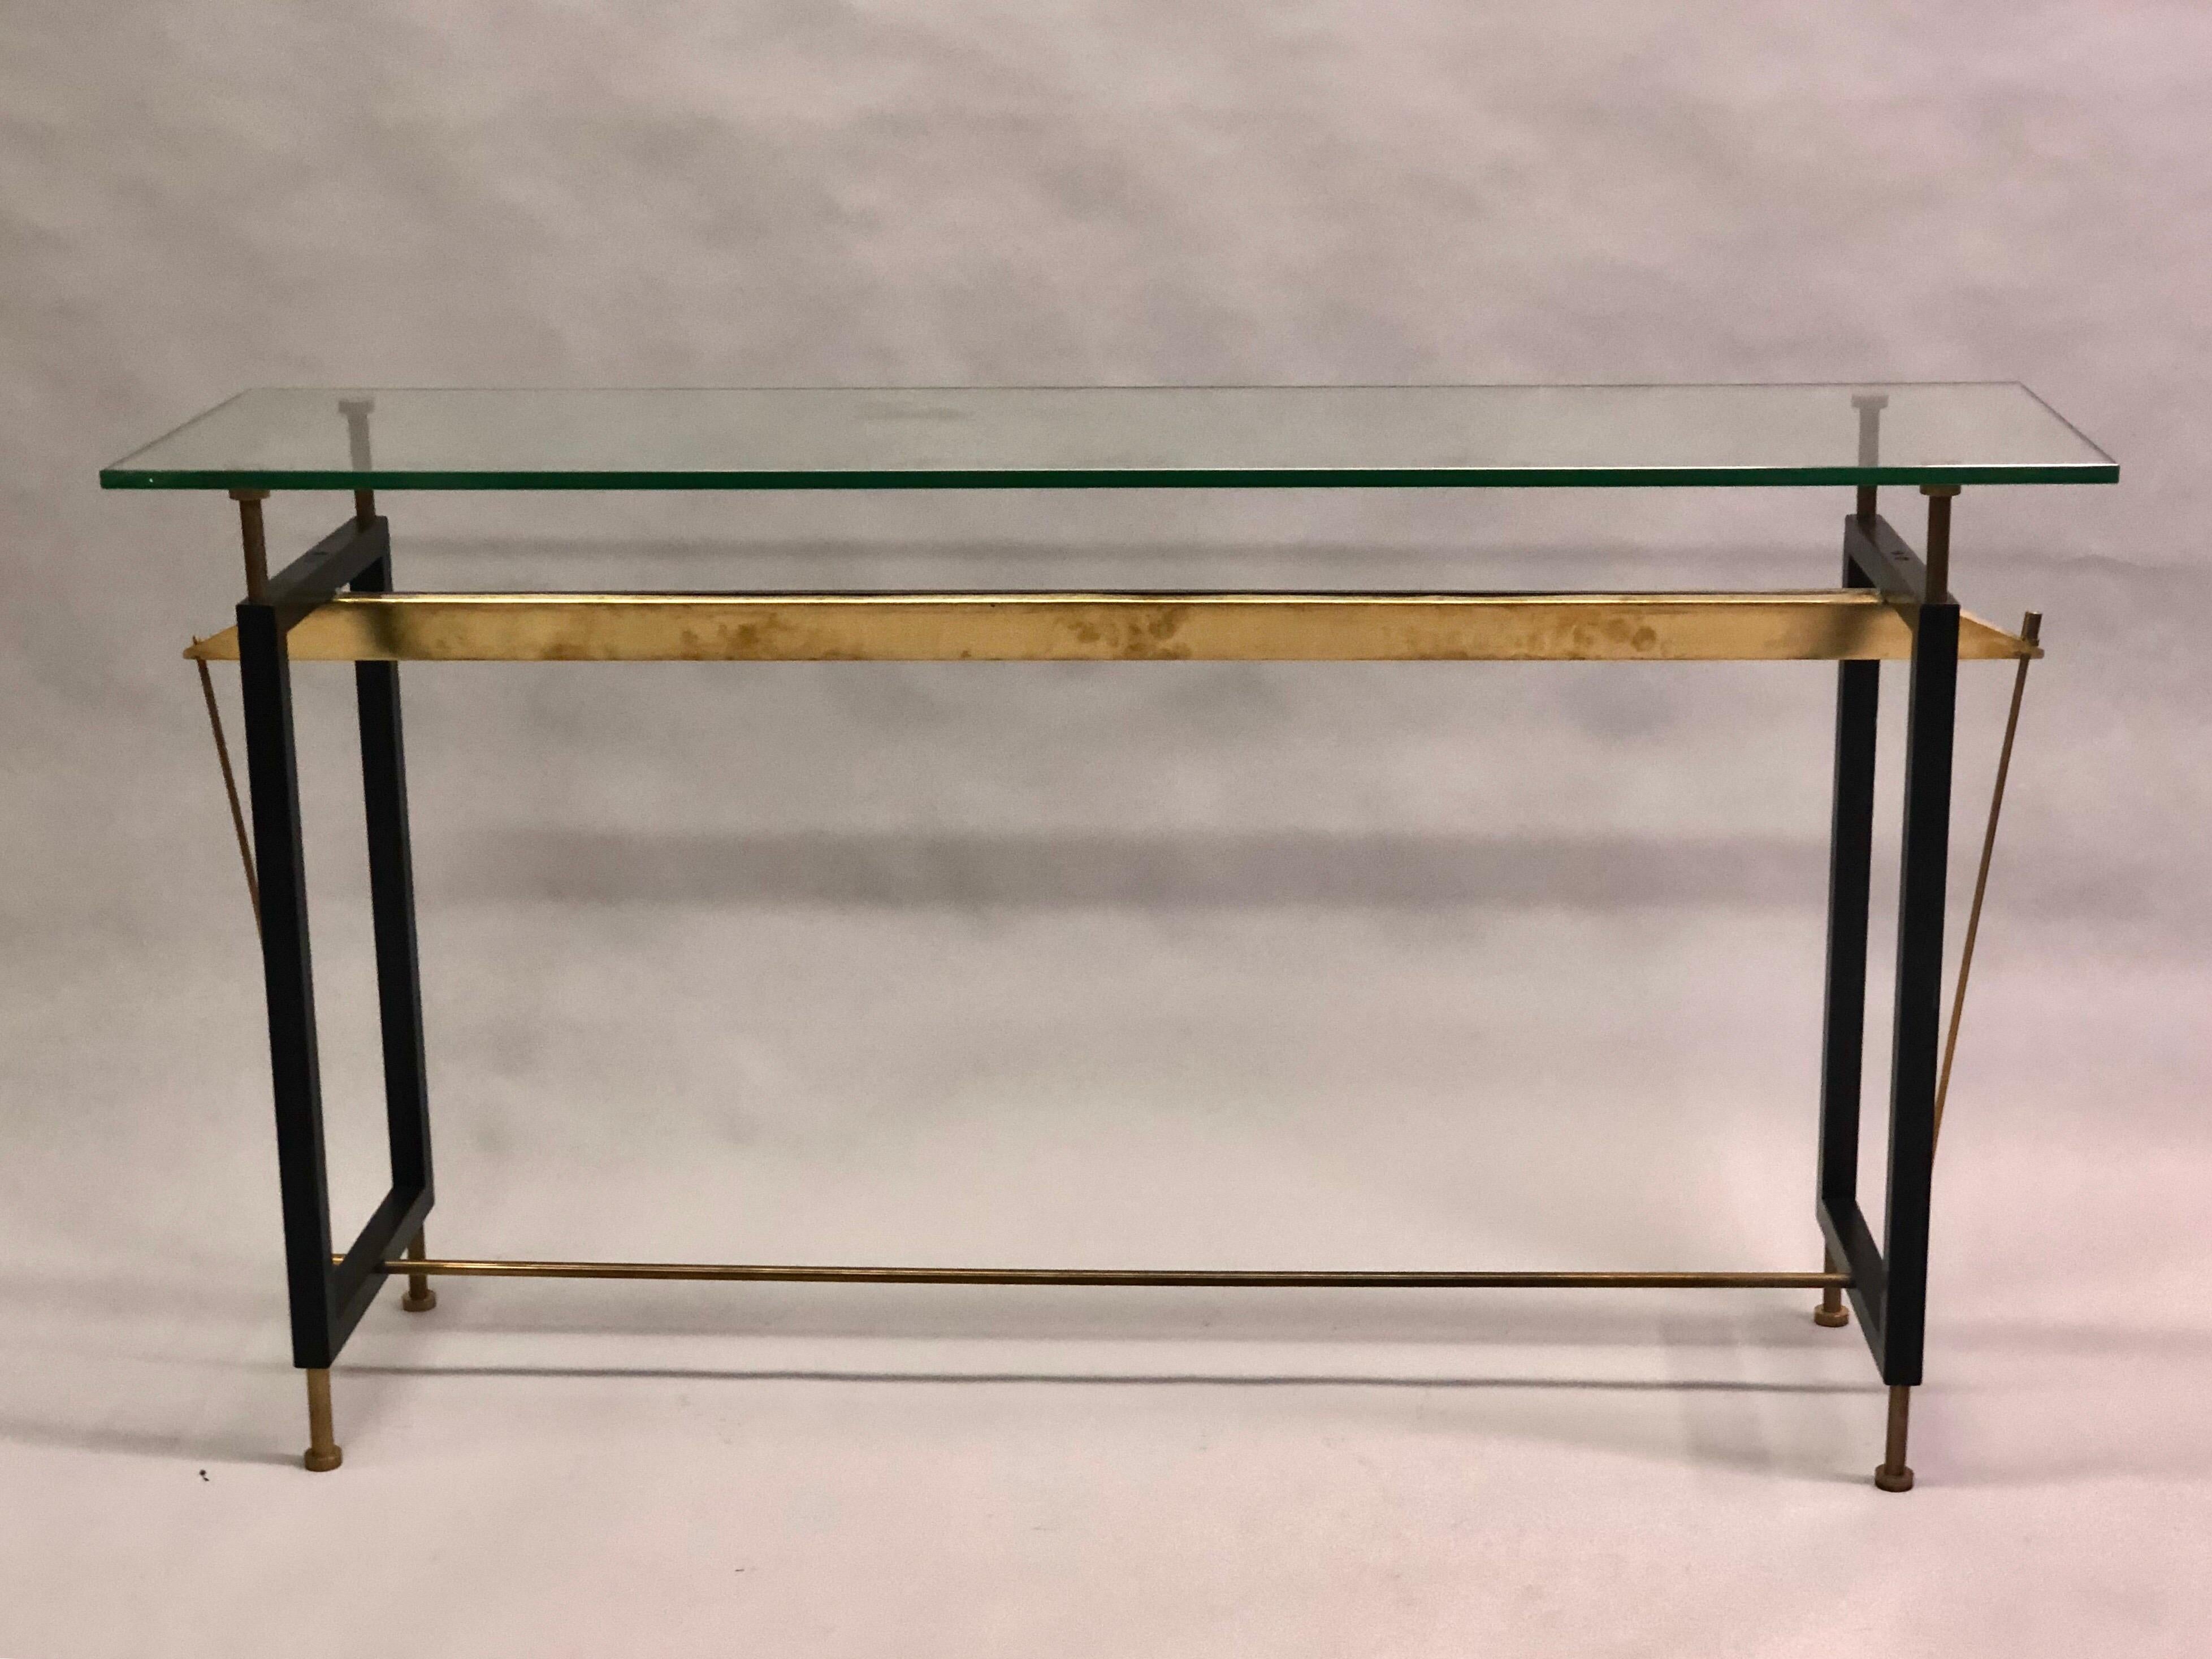 Italian Mid-Century Modern enameled steel, brass and glass cantilevered console Attributed to Franco Albini and Franca Helg.

The console / sofa table is elegantly conceived with a balance of stunning angles and details that are view-able from any